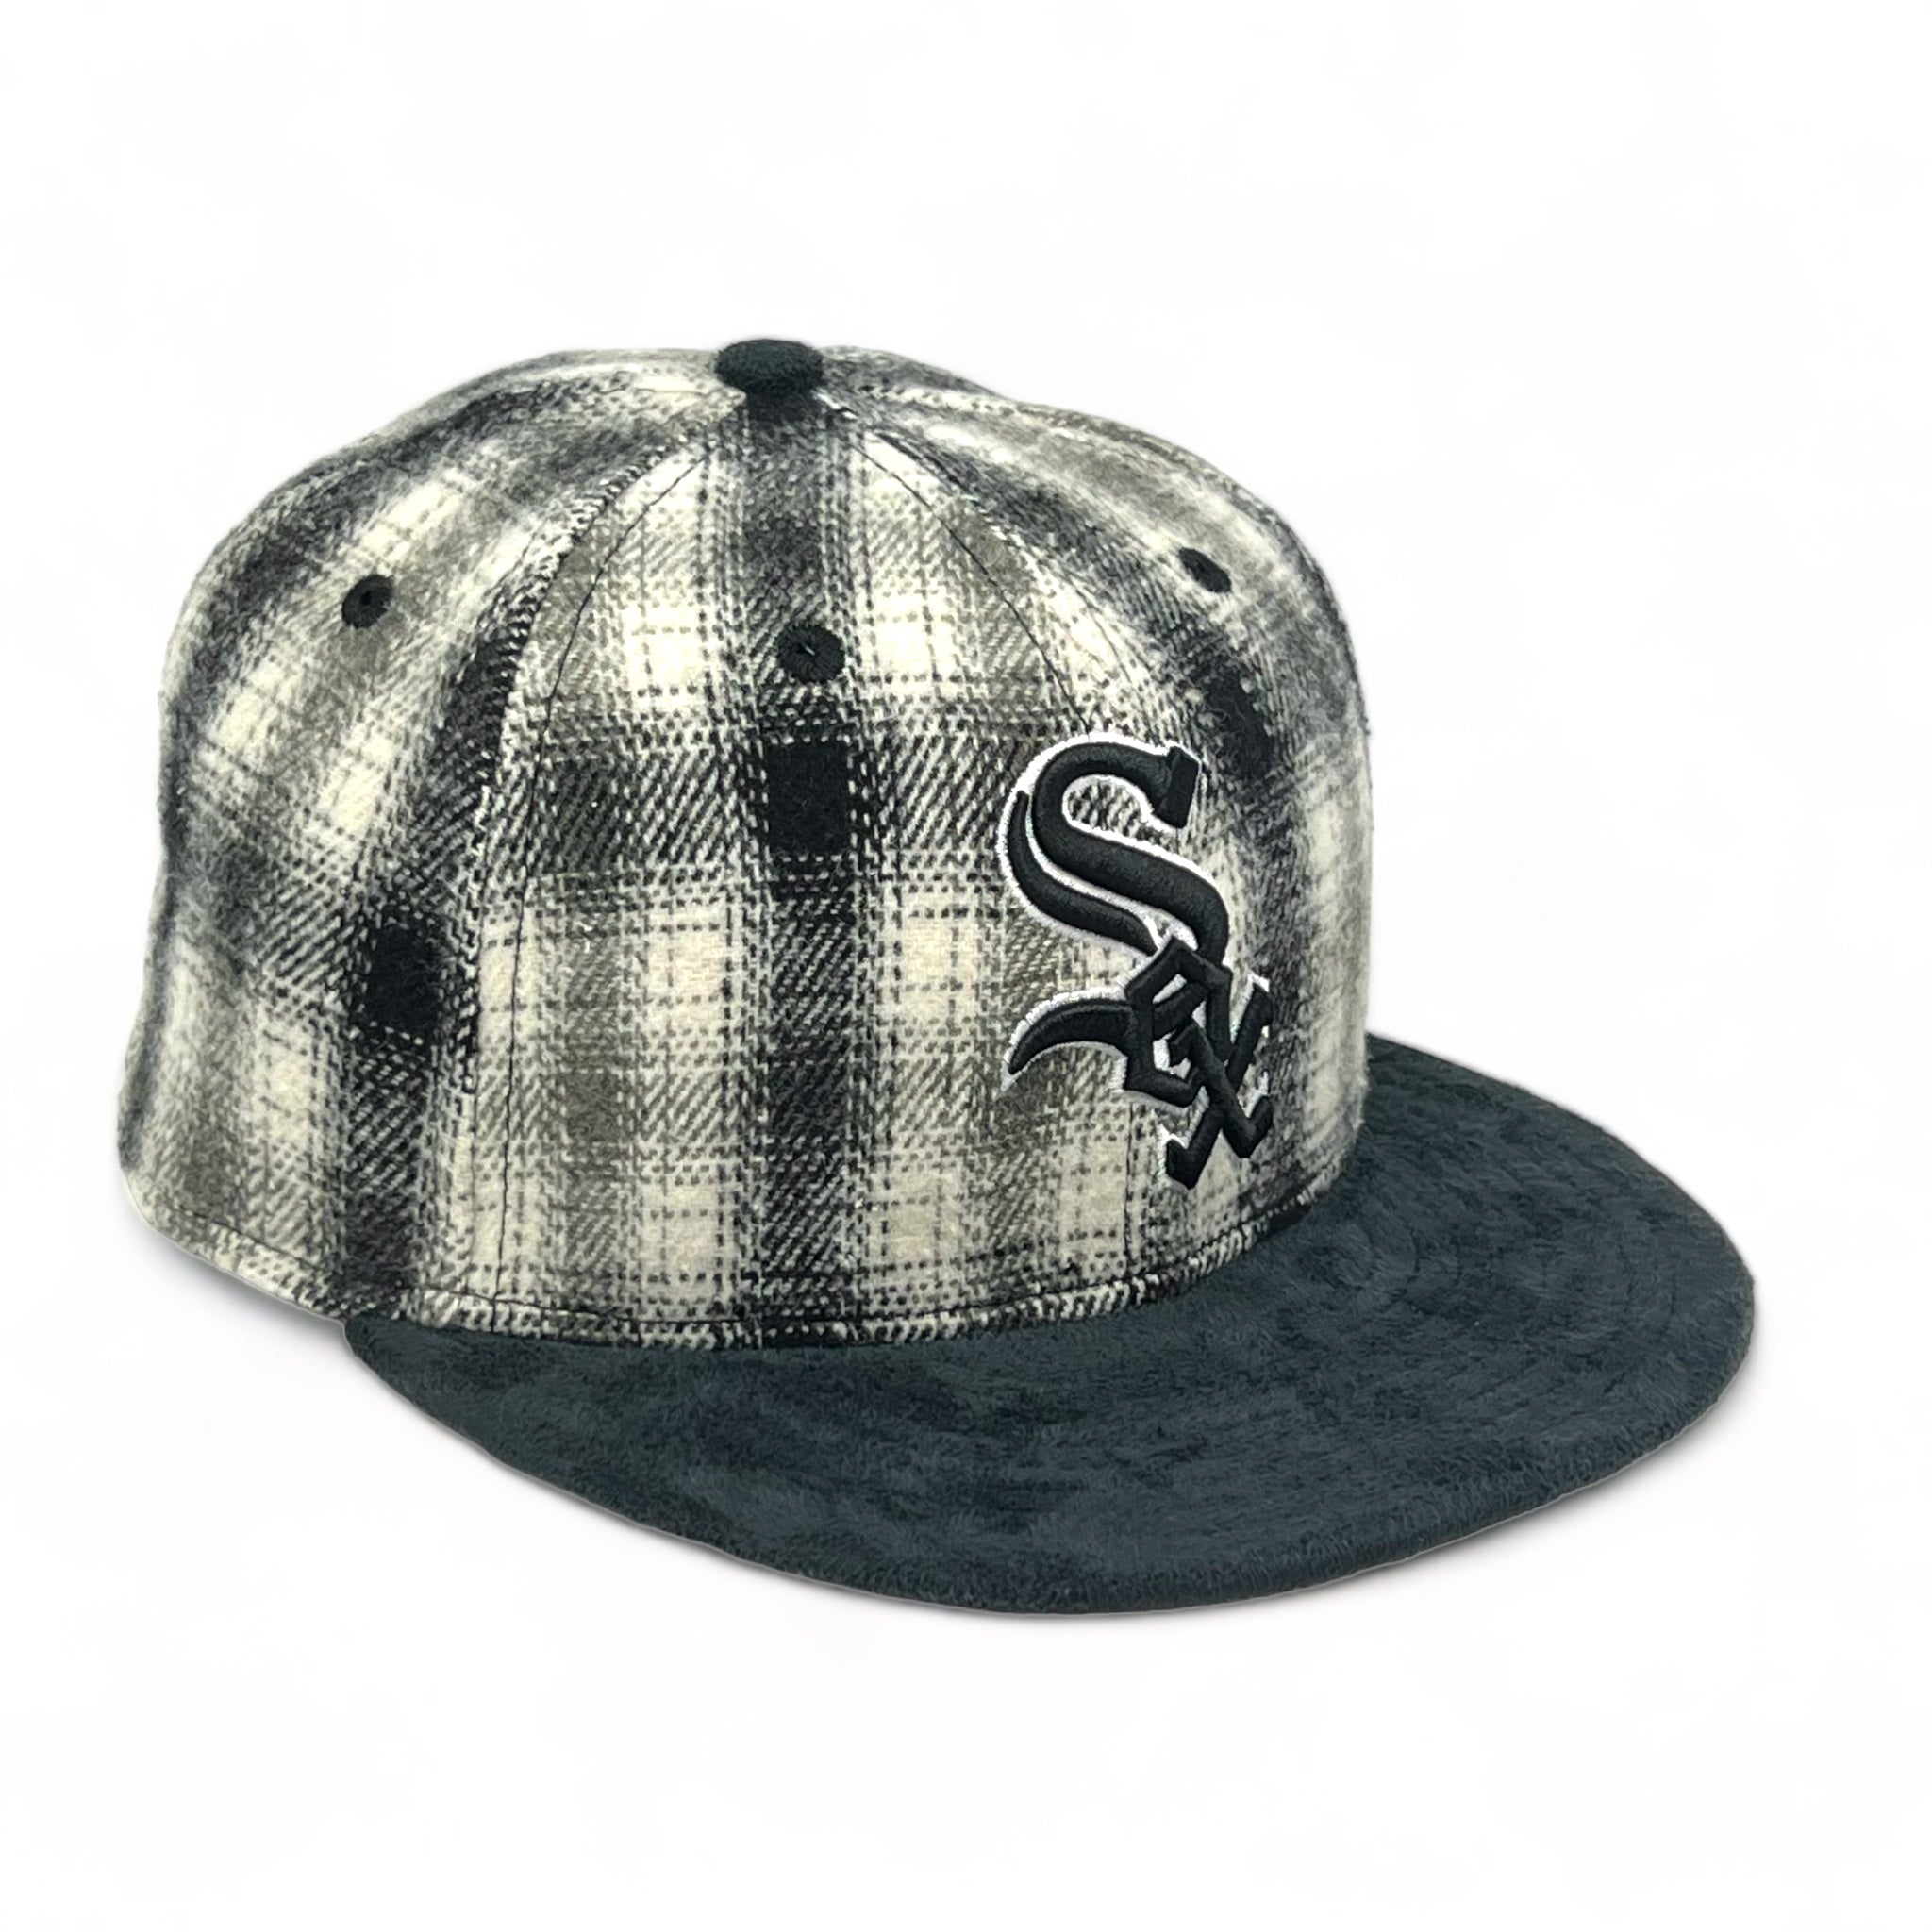 CHICAGO WHITE SOX (PLAID FLEECE) NEW ERA 59FIFTY FITTED